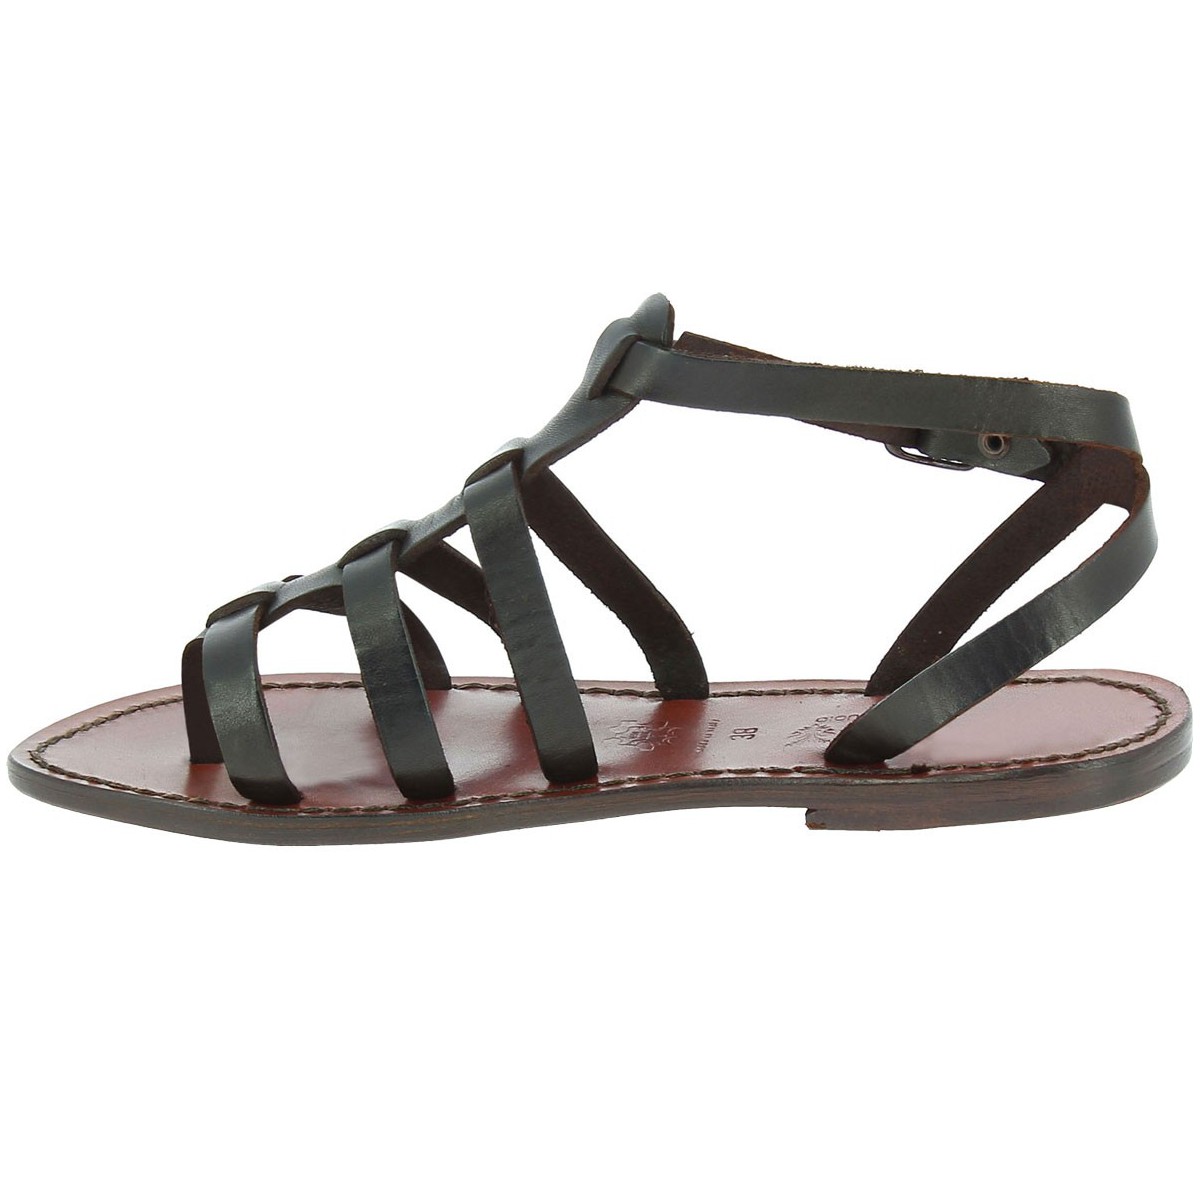 Women's dark brown gladiator sandals Handmade in Italy | The leather ...